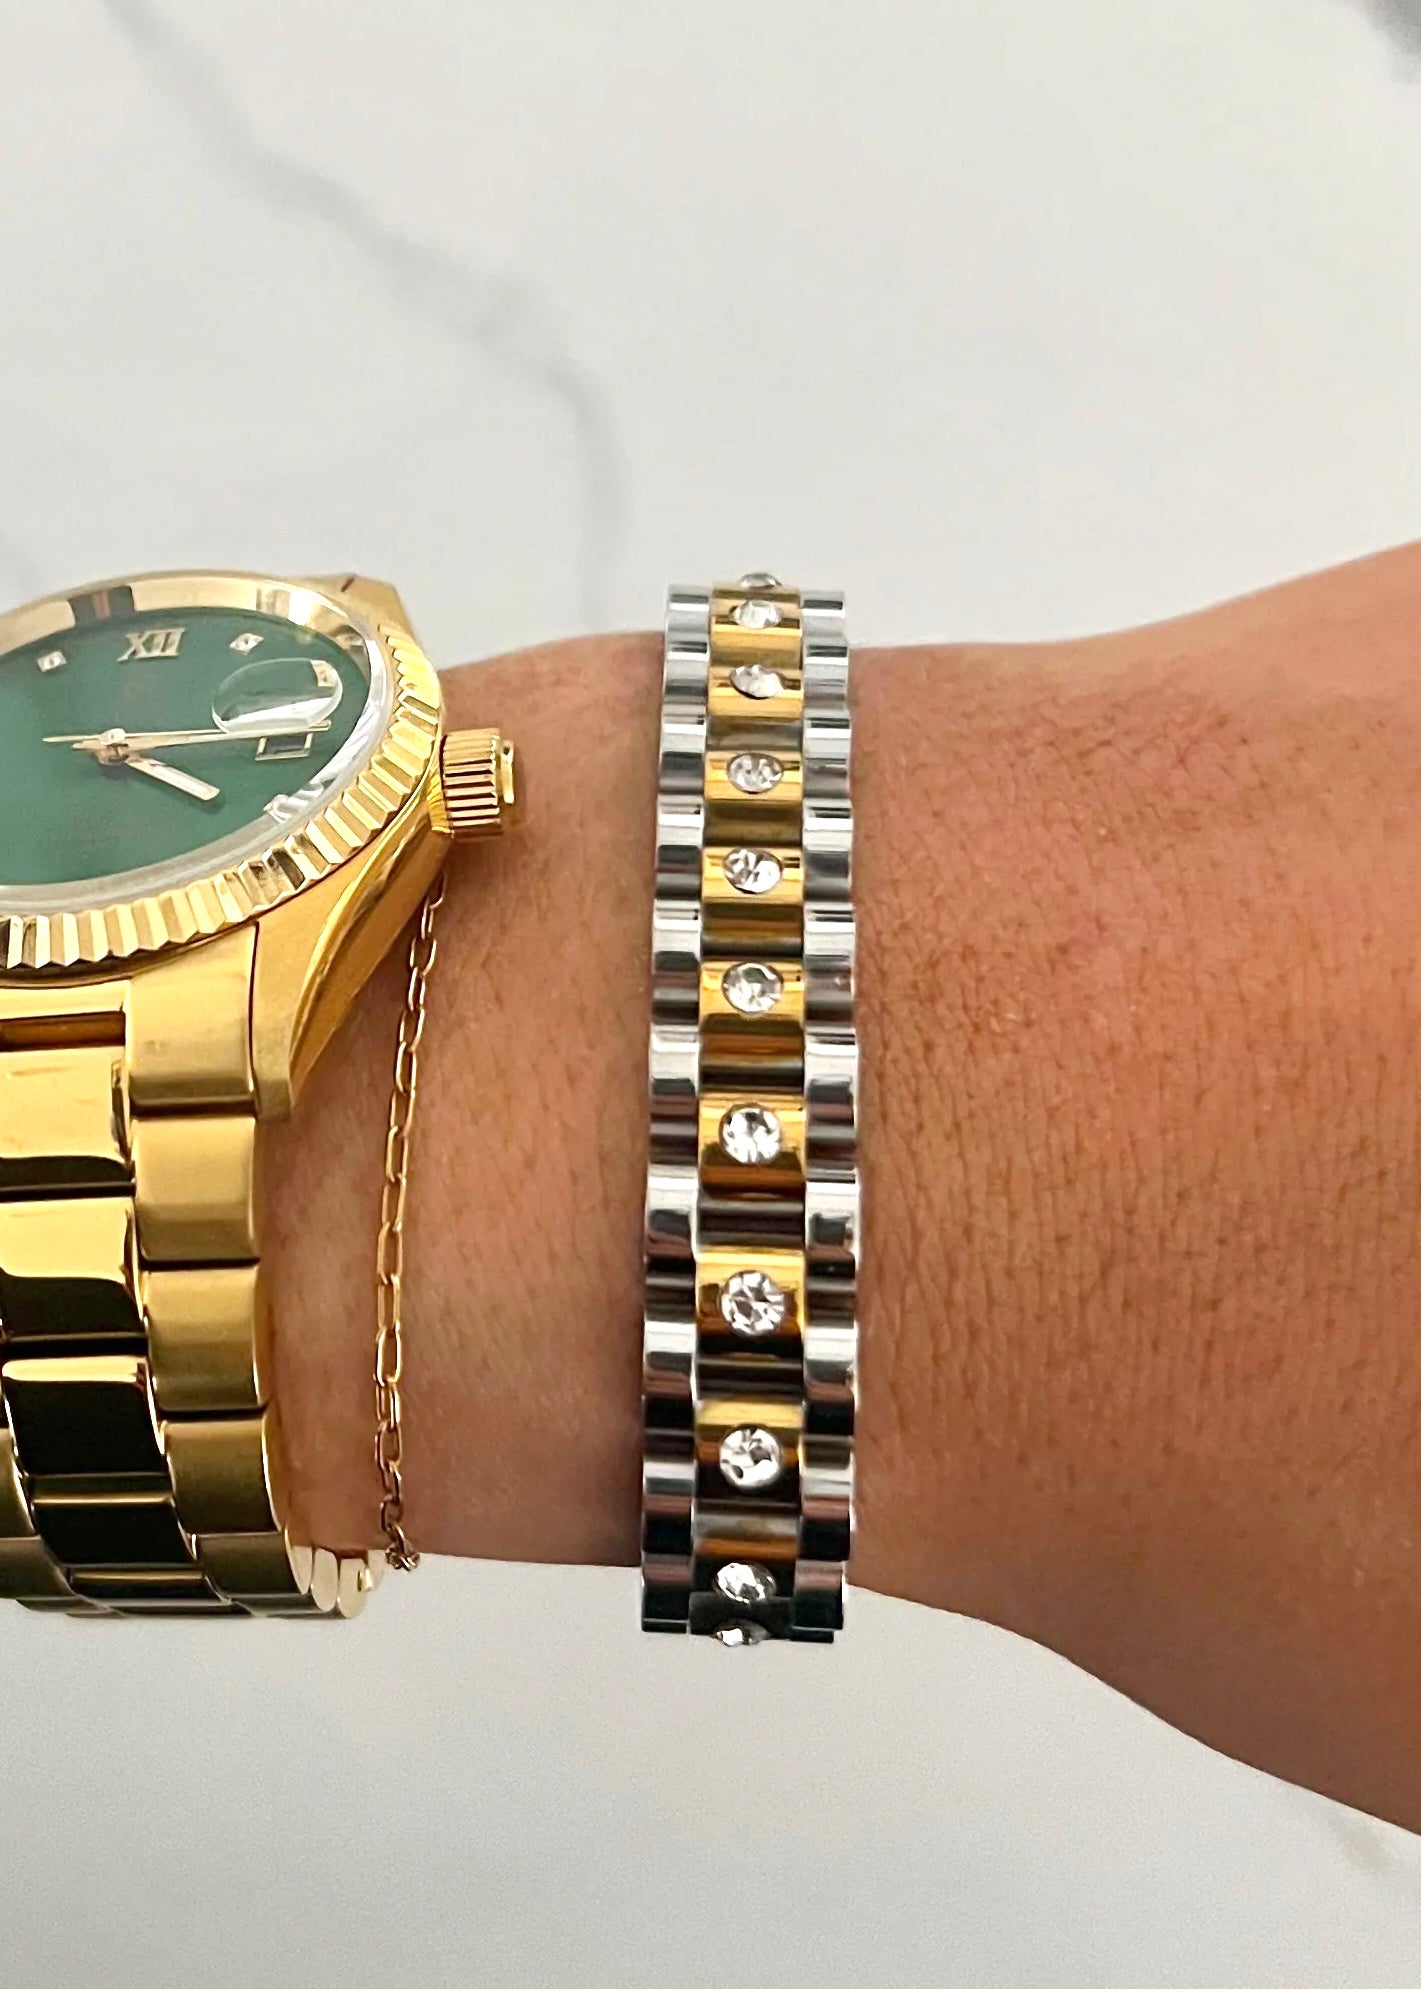 The Diamond Two-Toned Watch Band Bracelet